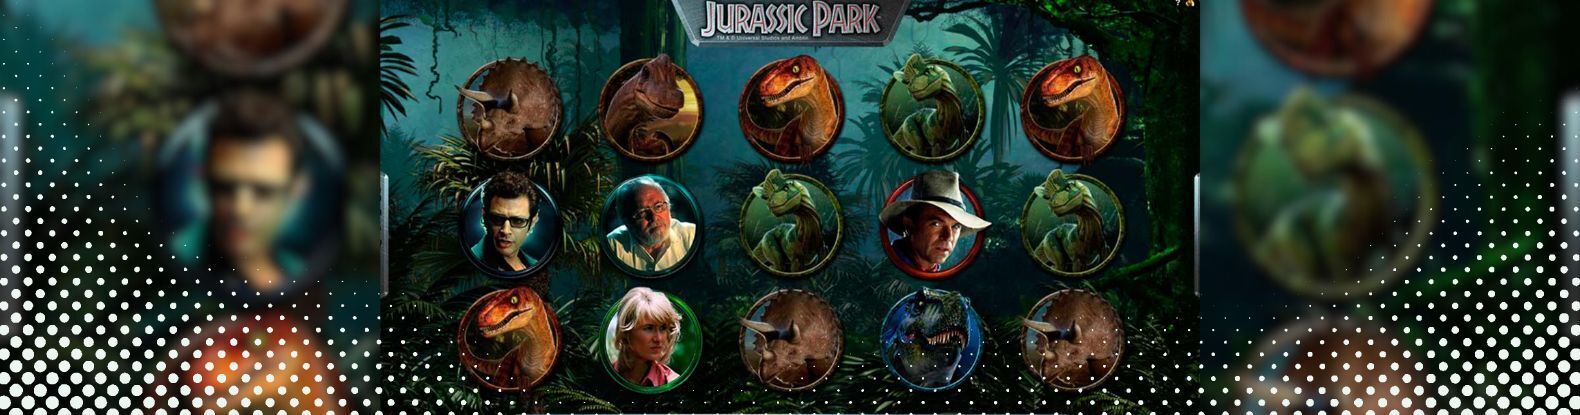 This is a picture of Jurassic Park Pokies Game by Microgaming